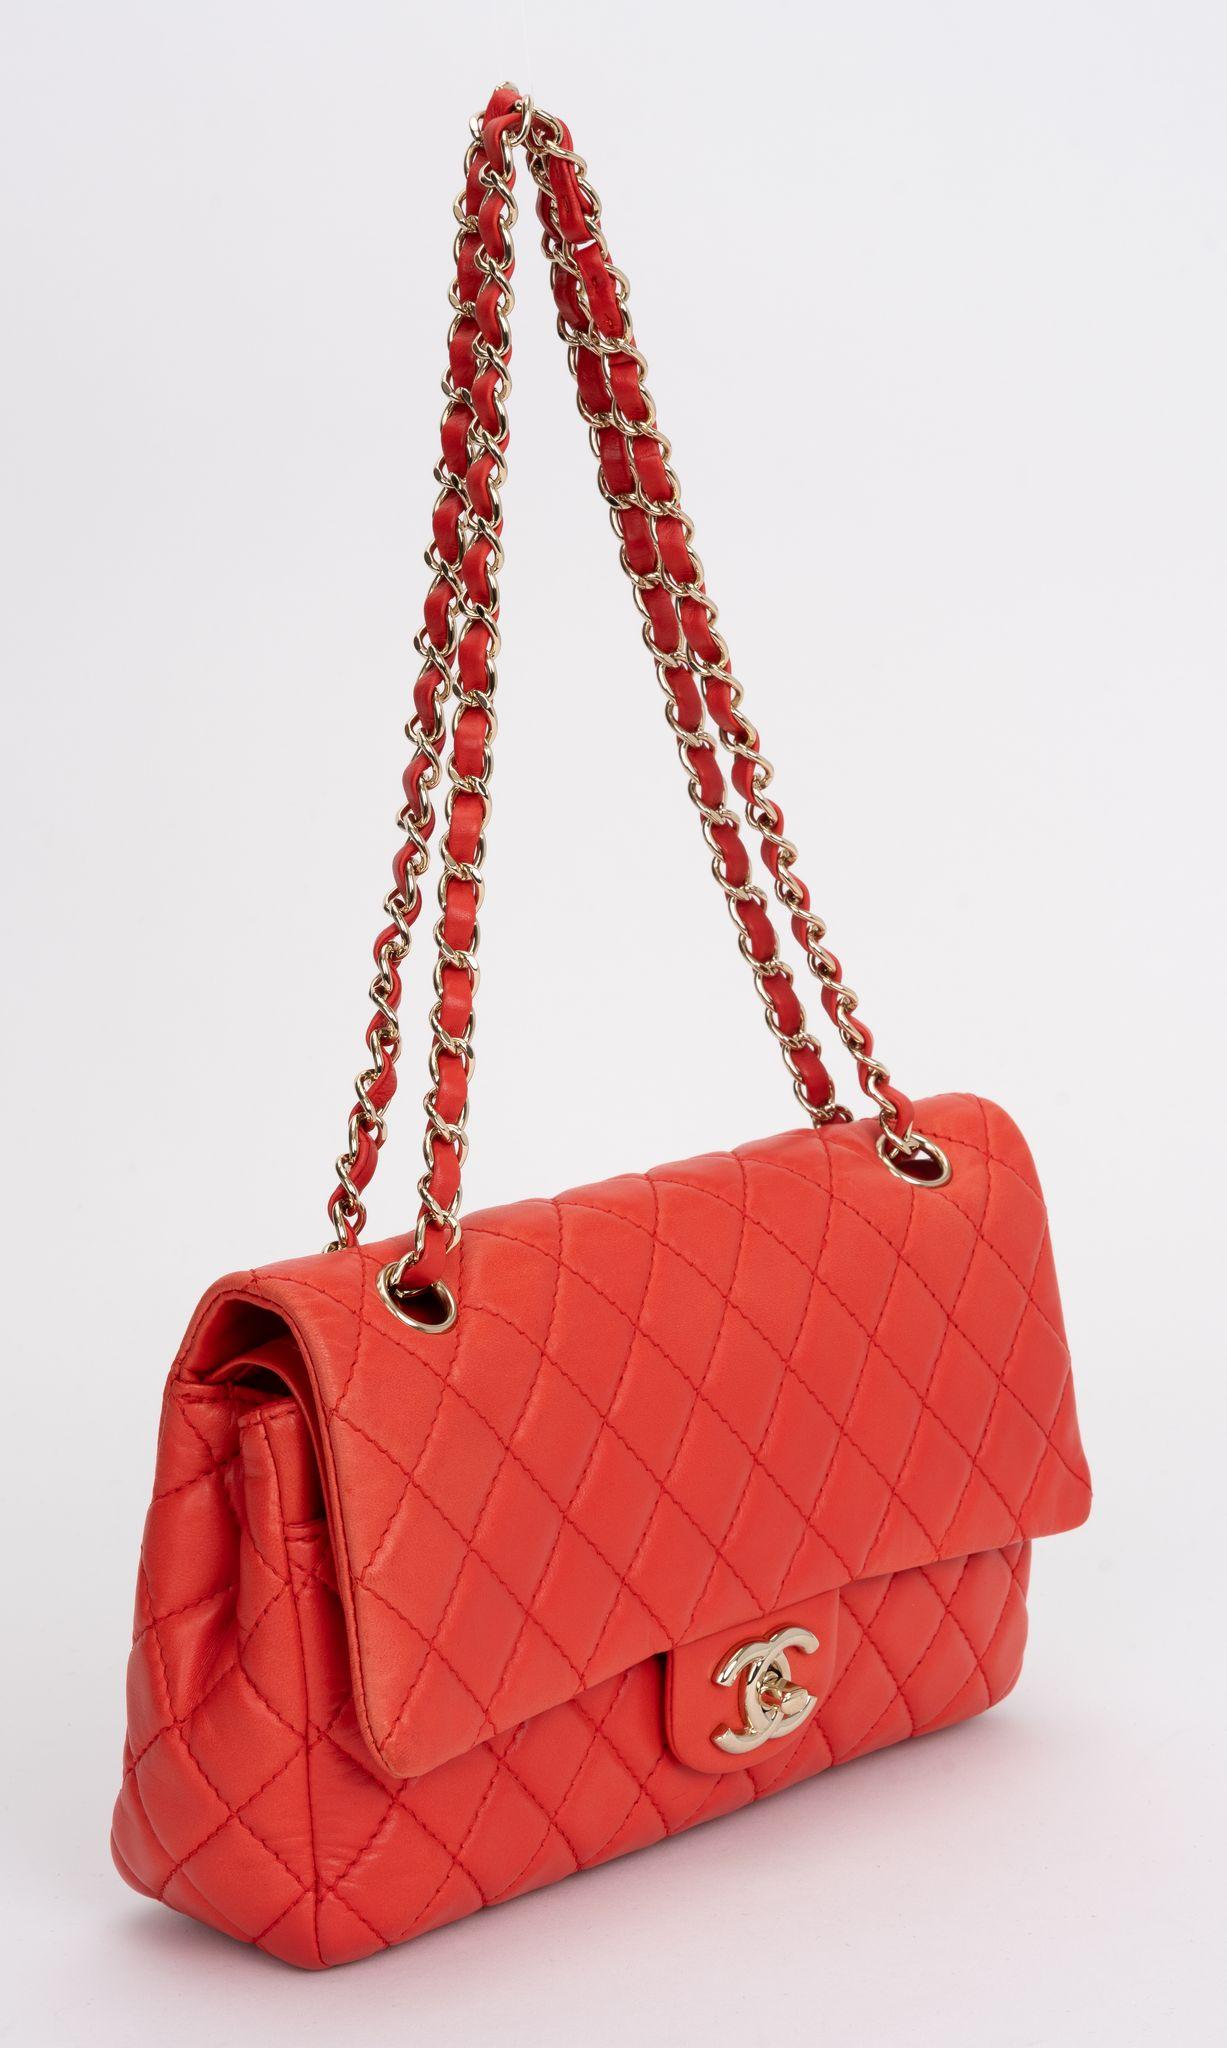 Chanel Red Quilted Classic Flap Bag in Lambskin Leather features an intertwined chain leather strap and a gold CC logo closure. There is one zipper pocket in the interior and a rear slip pocket on rear exterior.

Shoulder drop 9